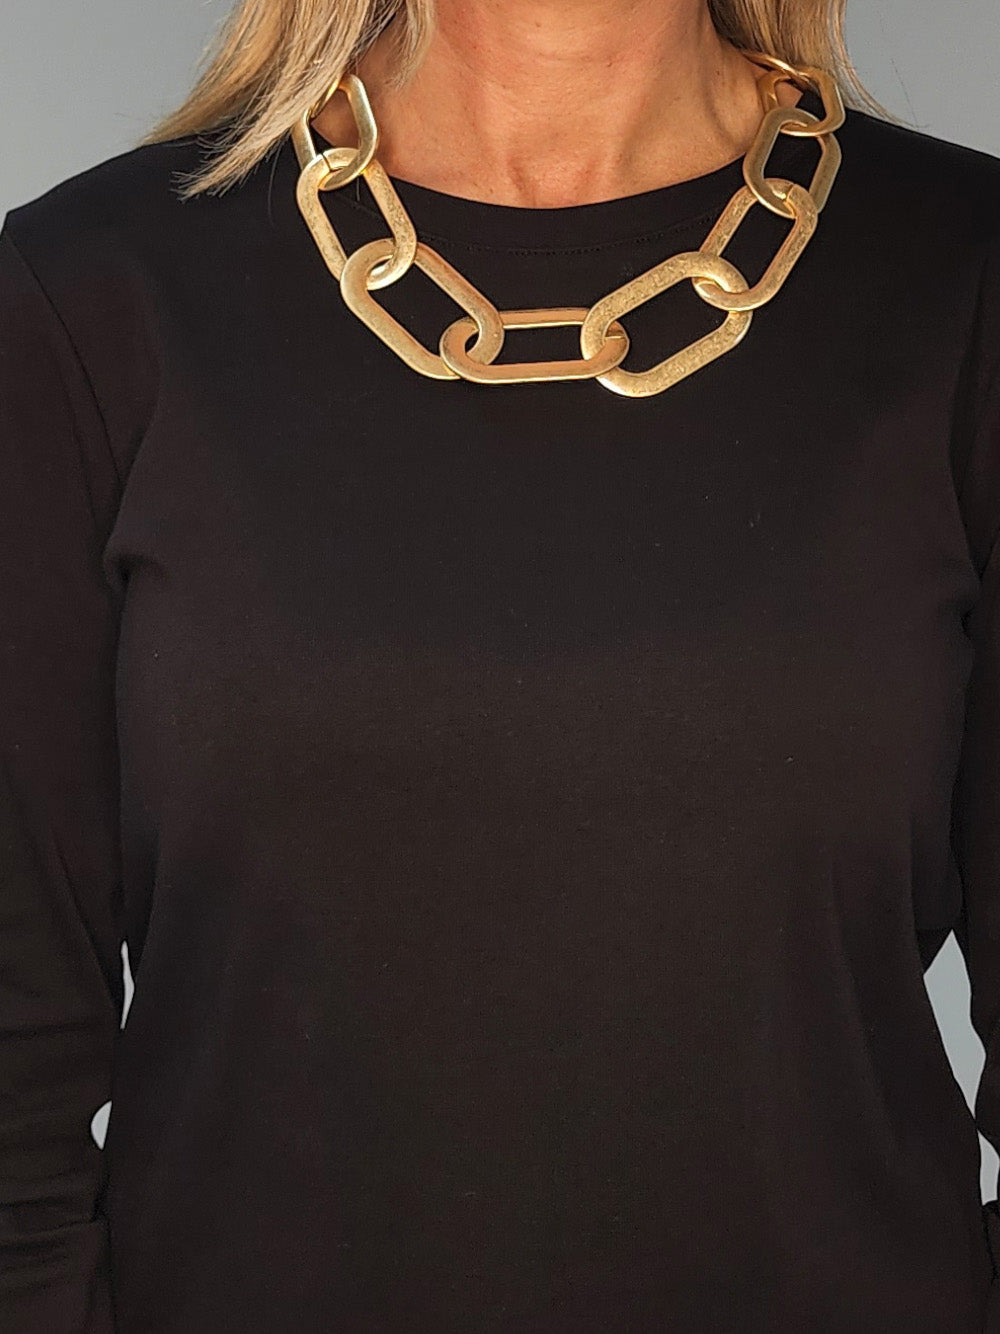 Chunky Chain Link Necklace - Gold